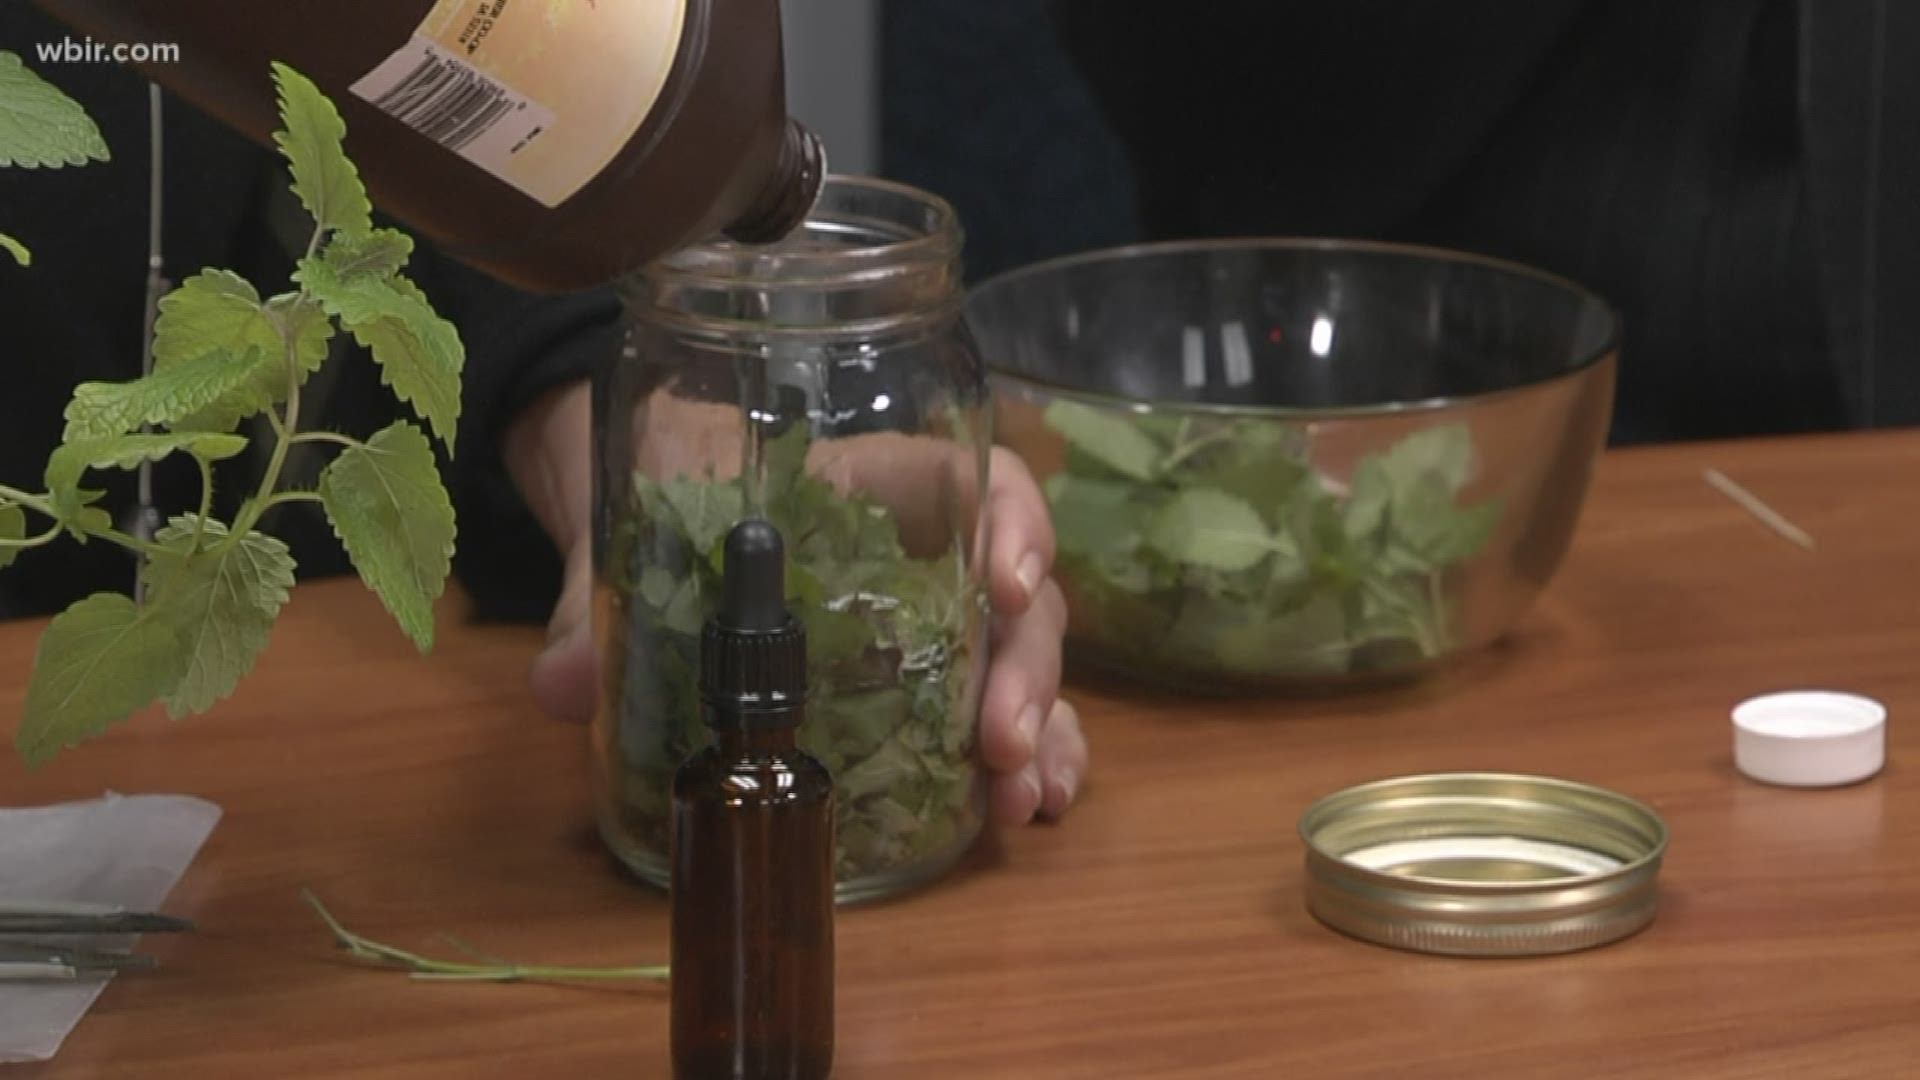 Erin's Meadow Herb Farm shows us how to make herbal "glycerites."